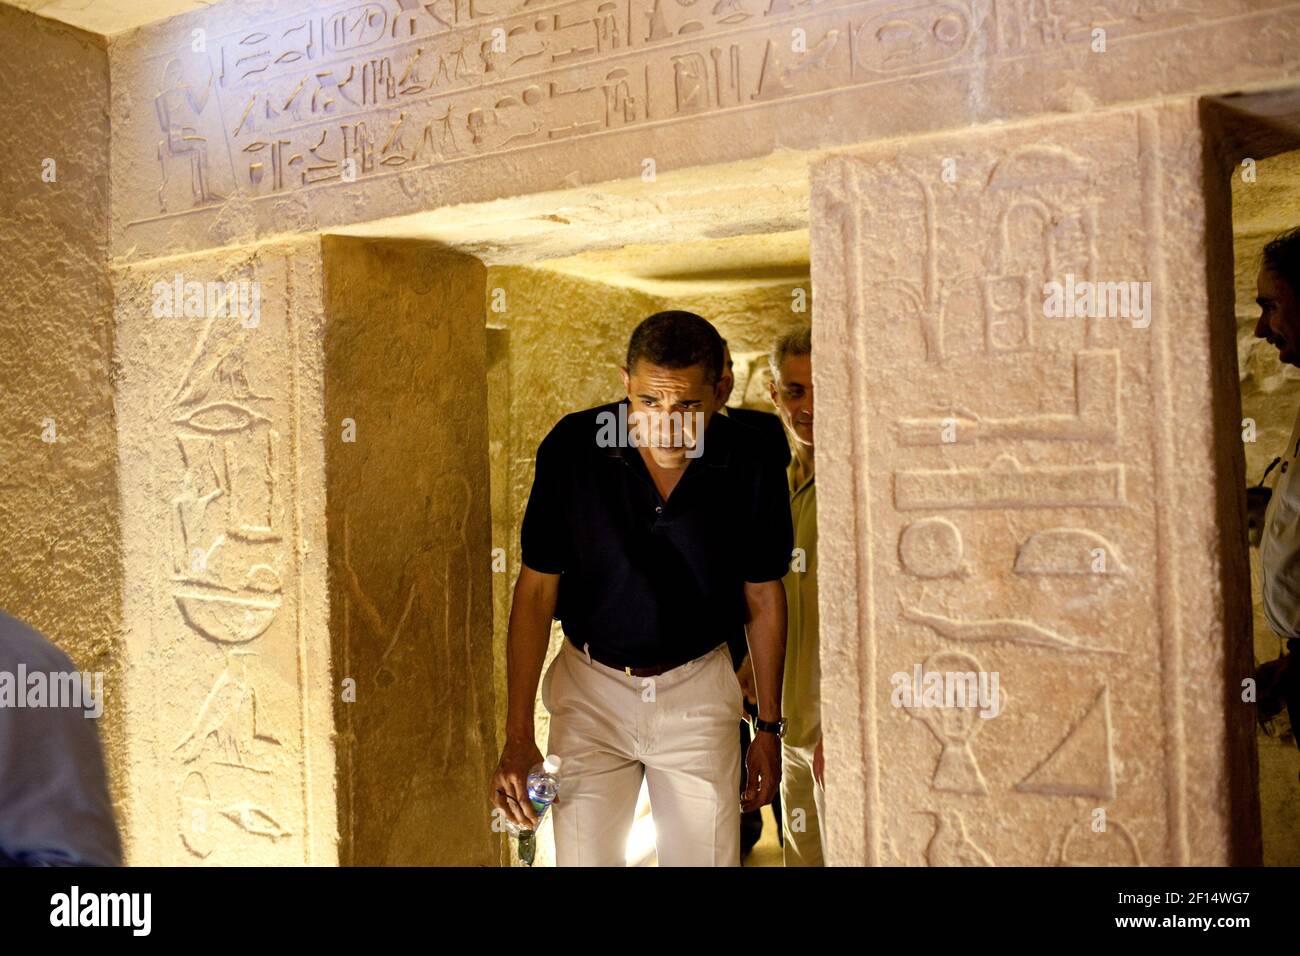 President Barack Obama ducks his head to get through an entranceway on a tour of the Pyramids and Sphinx in Egypt June 4 2009. Stock Photo